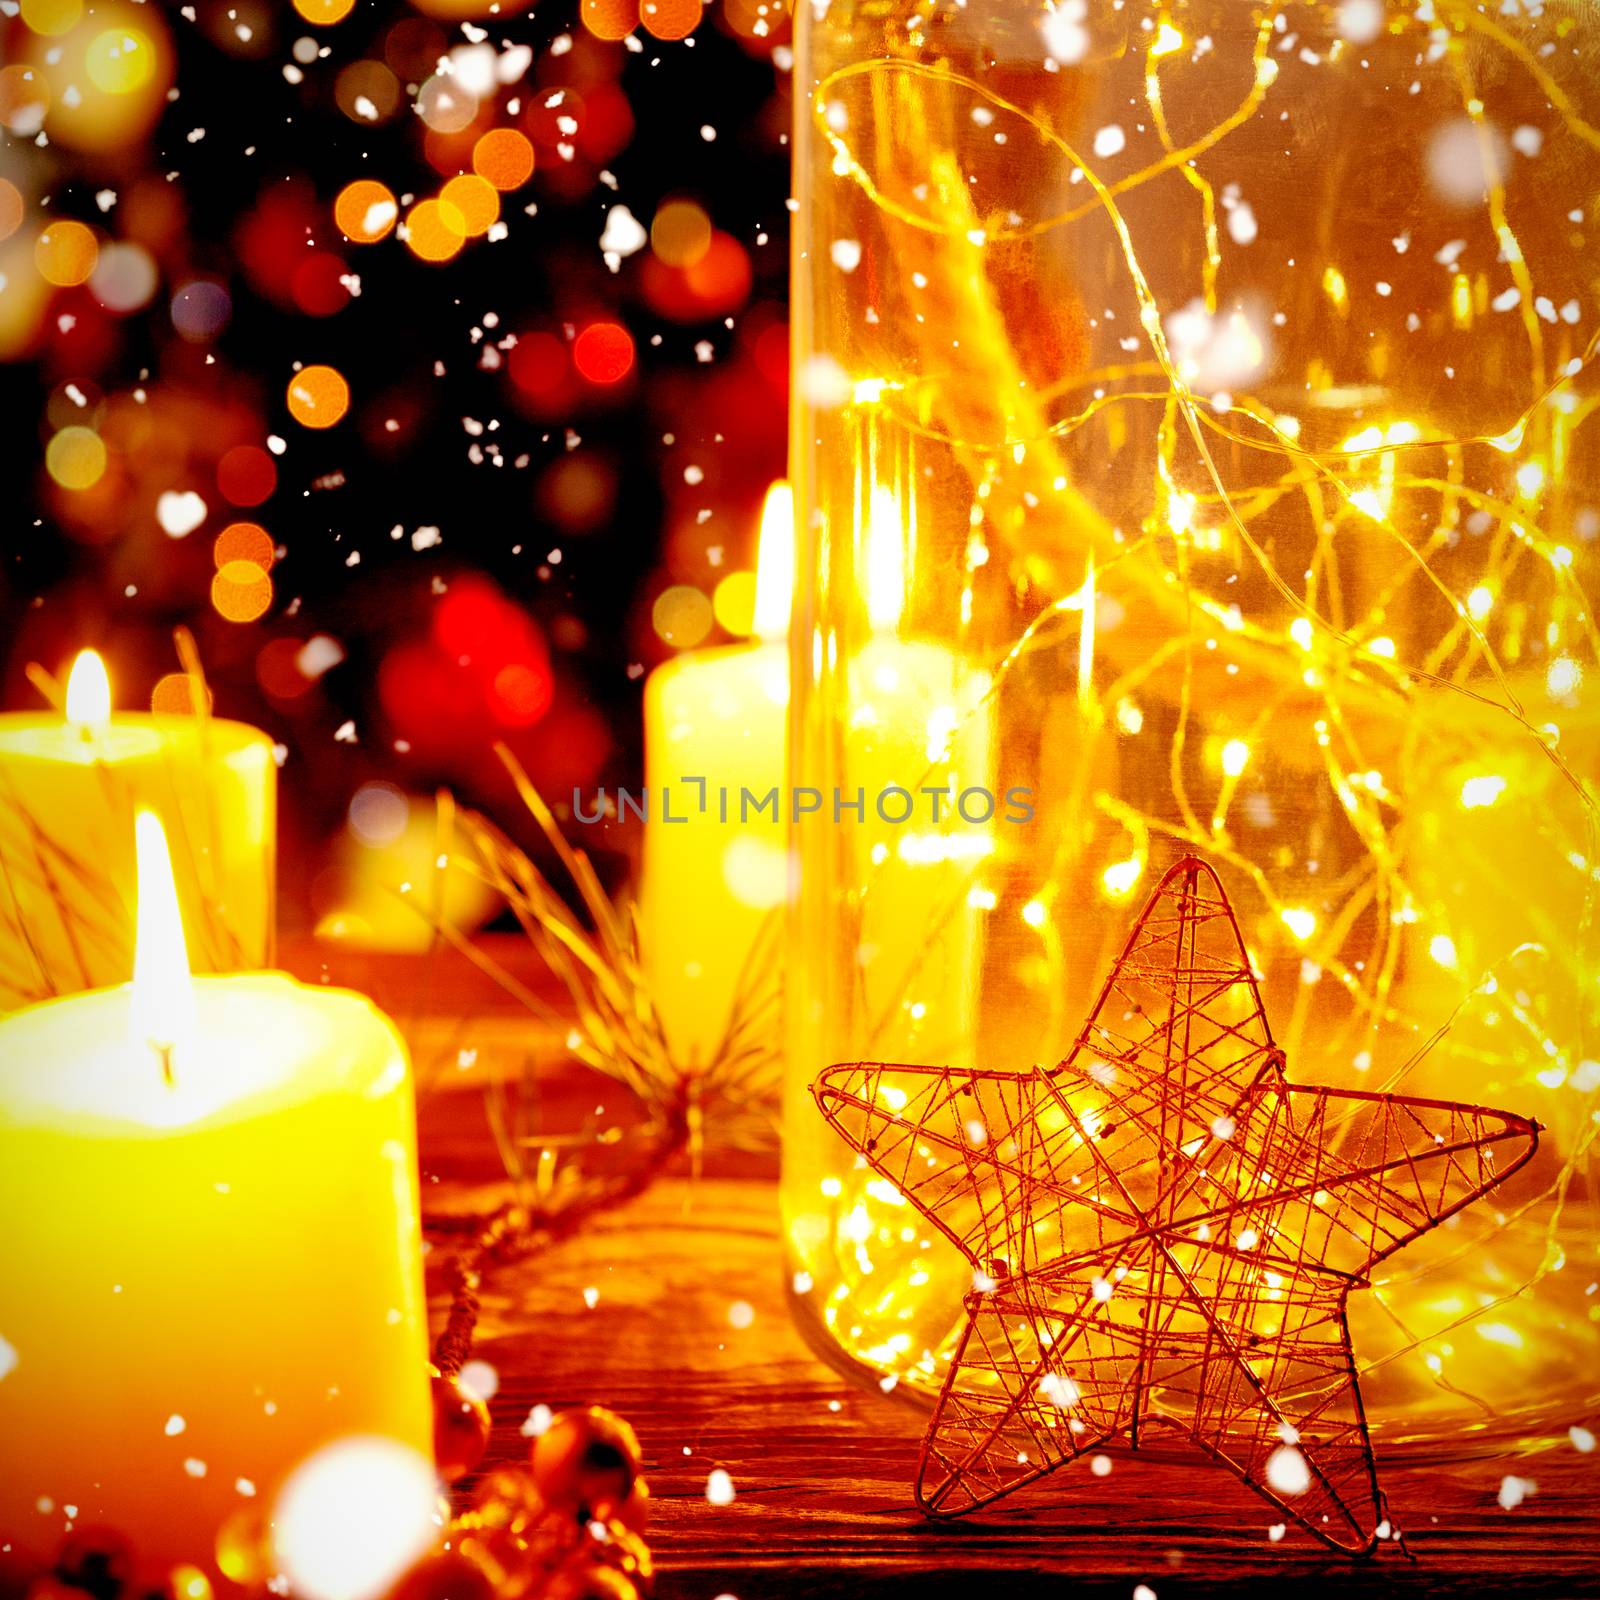 Snow falling against christmas electric garland in a glass jar with candles